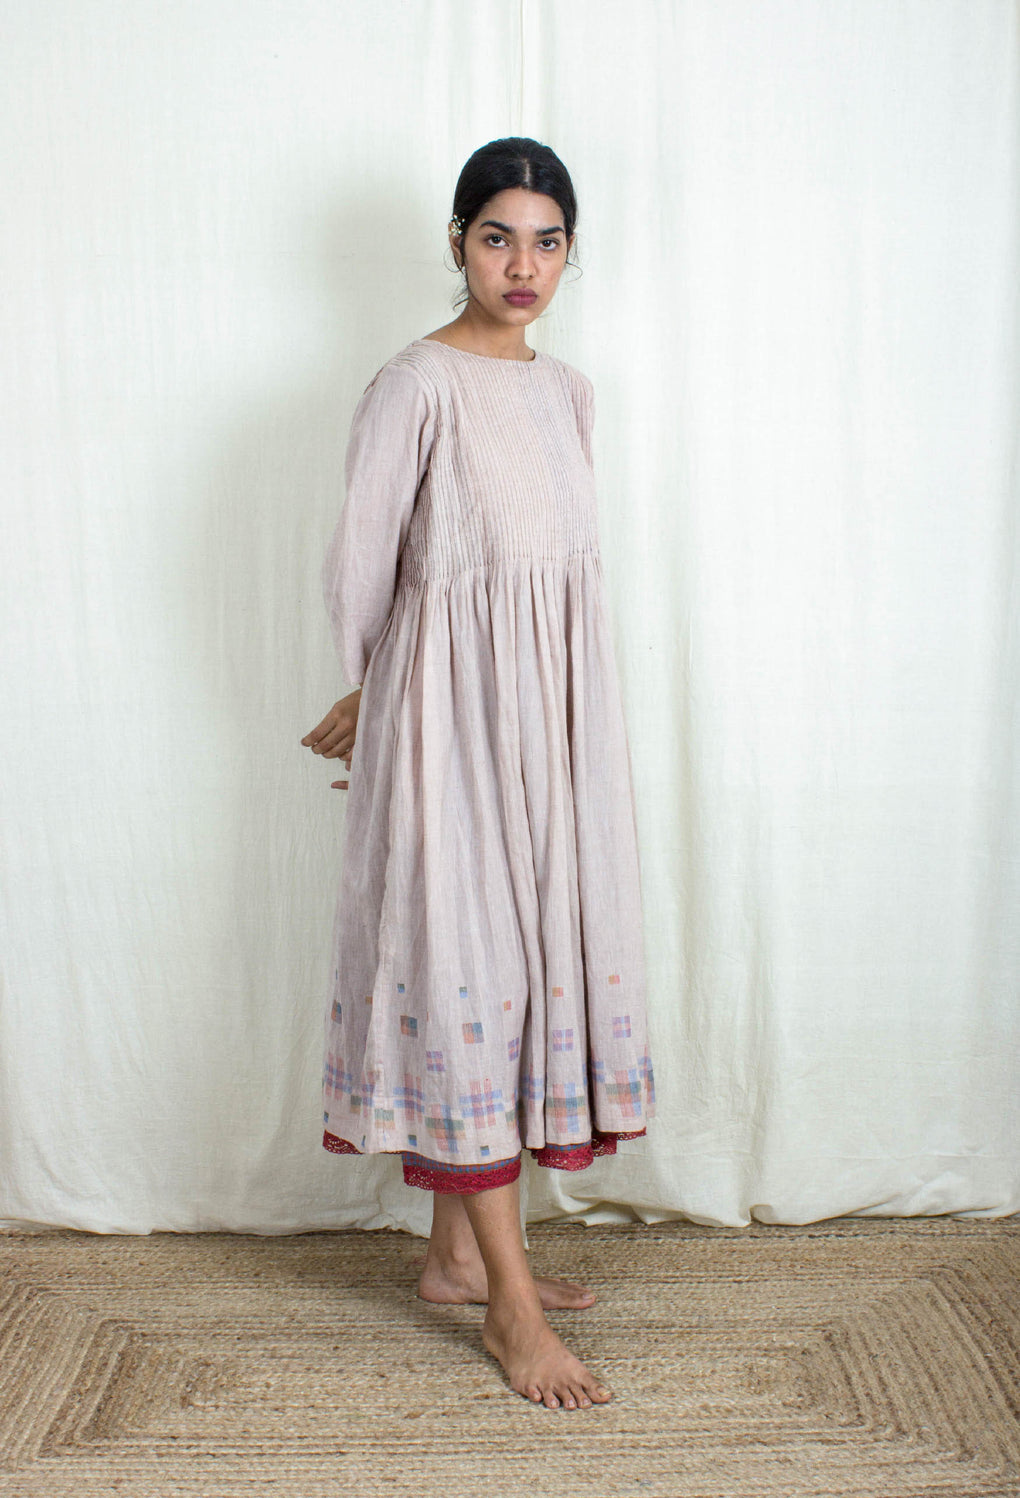 Zephyr - Pleated Light Pale Pink Dress with Gingham Lace Slip - Karnam